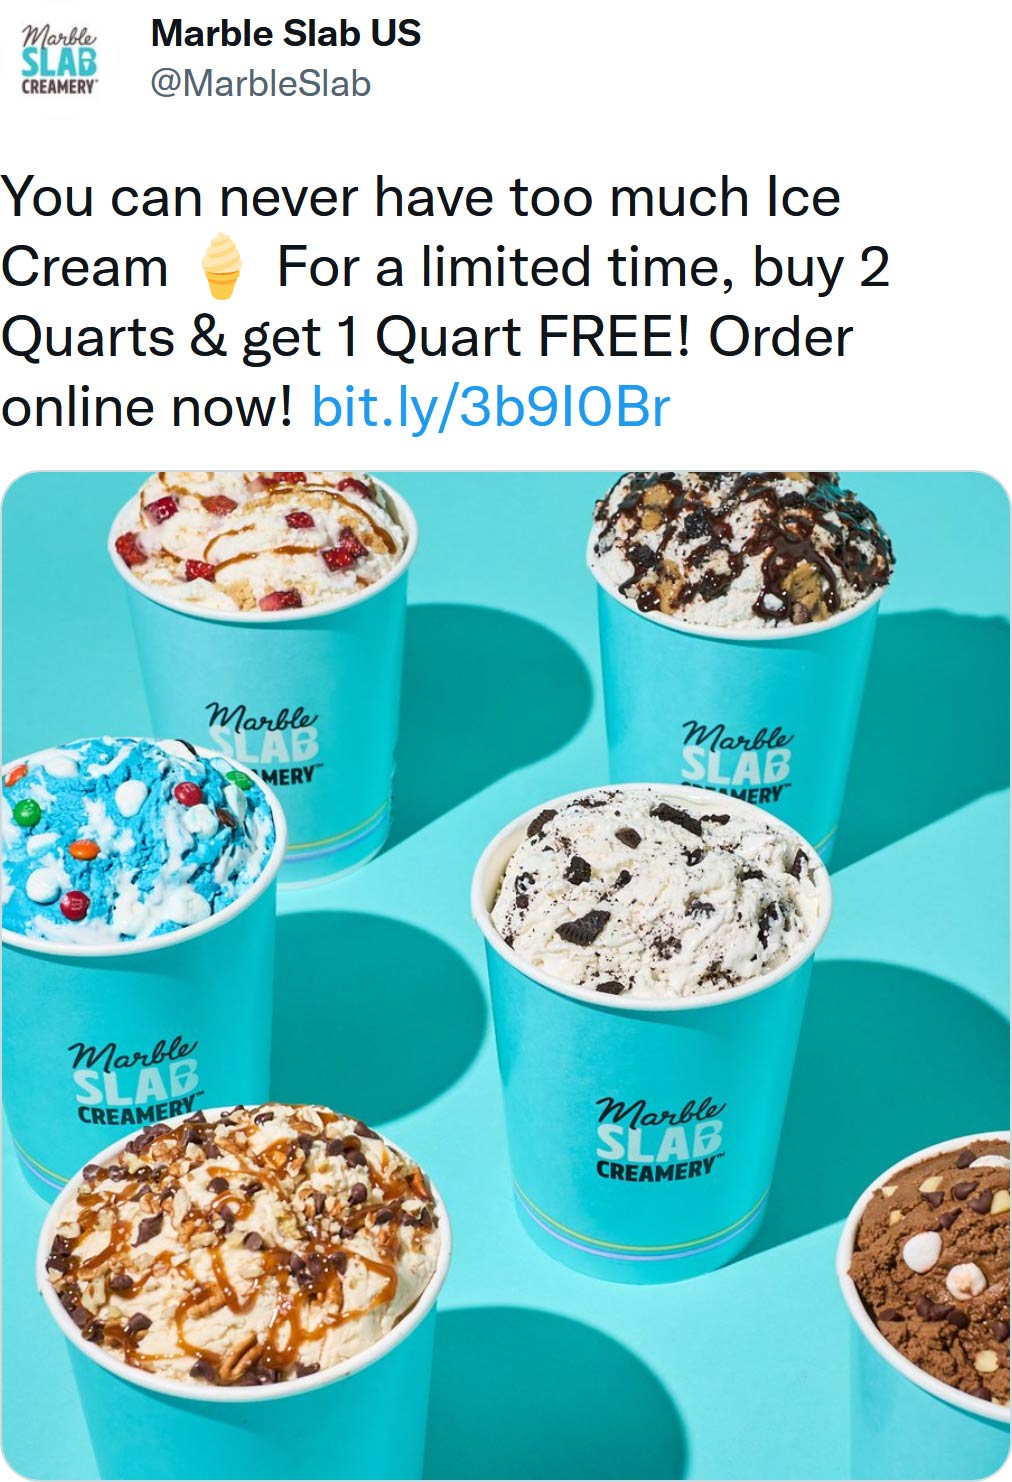 Marble Slab Creamery coupons & promo code for [January 2023]